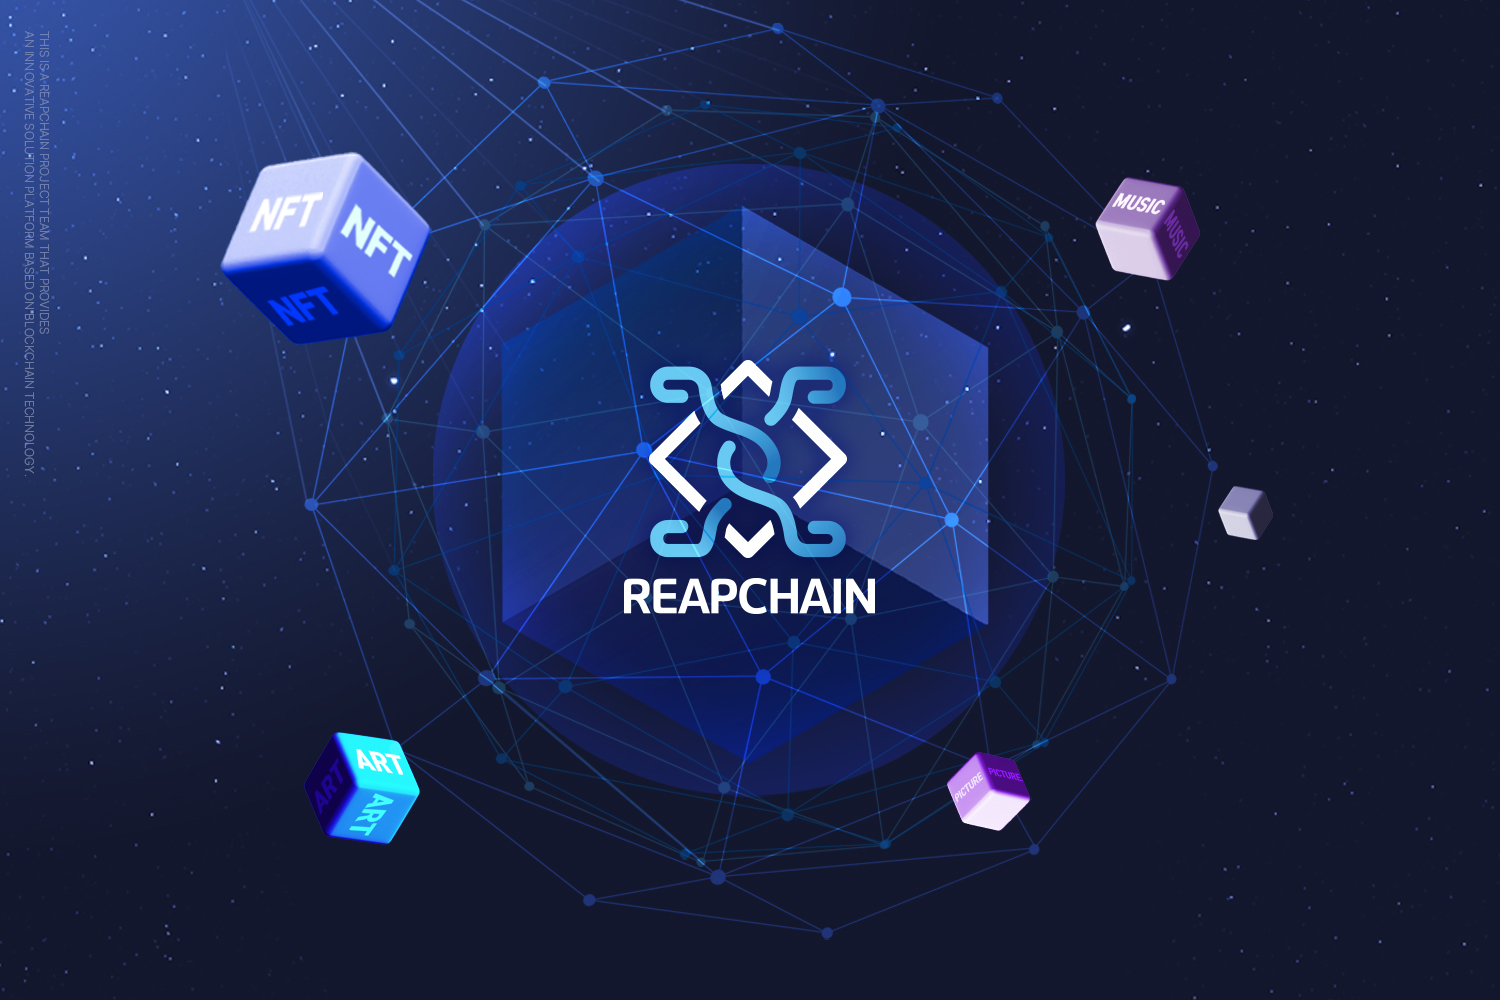 ReapChain “Full-scale entry into the NFT market.”